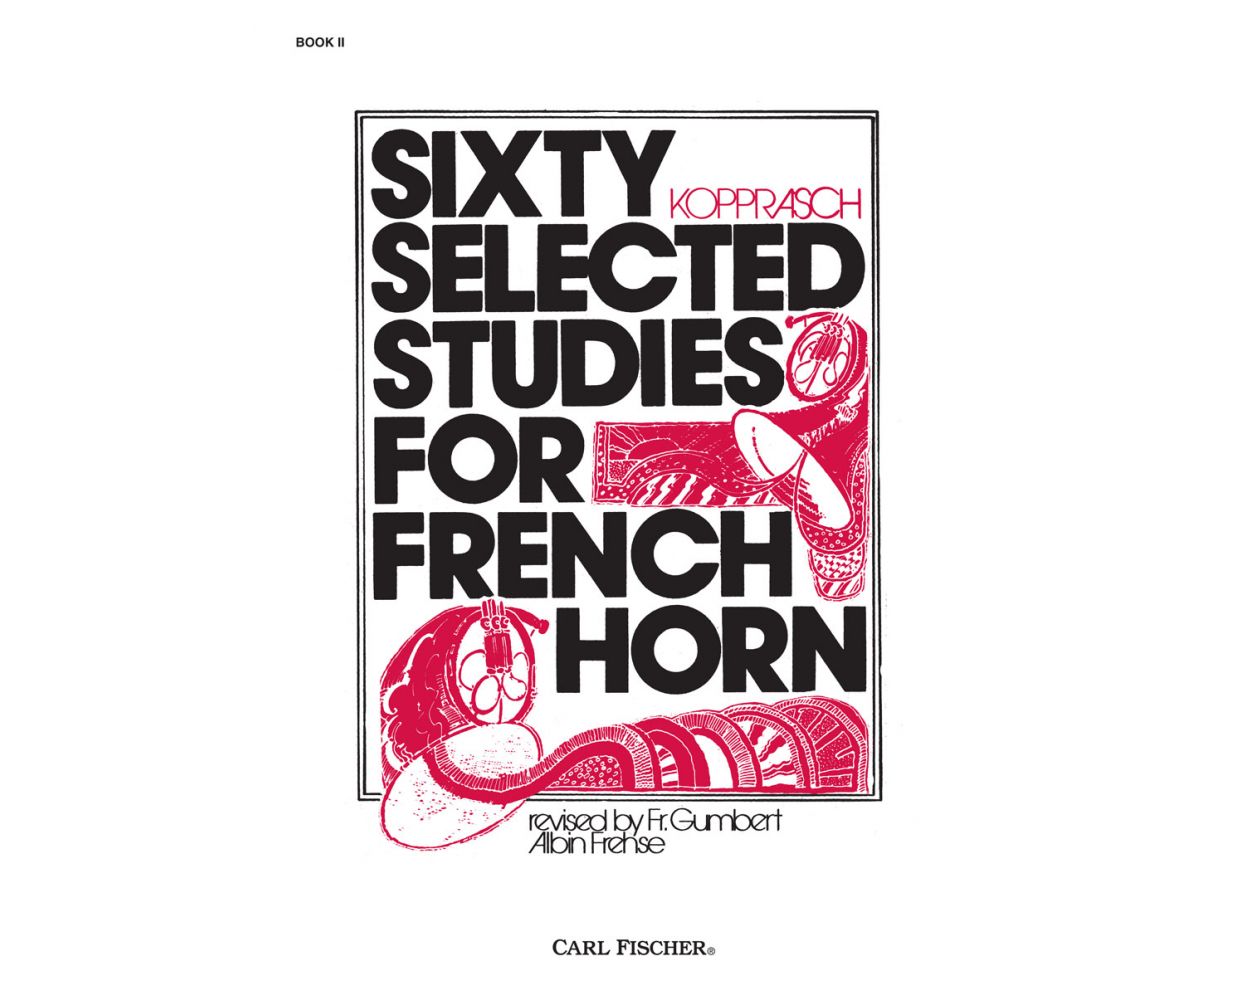 Kopprasch: Sixty Selected Studies for French Horn